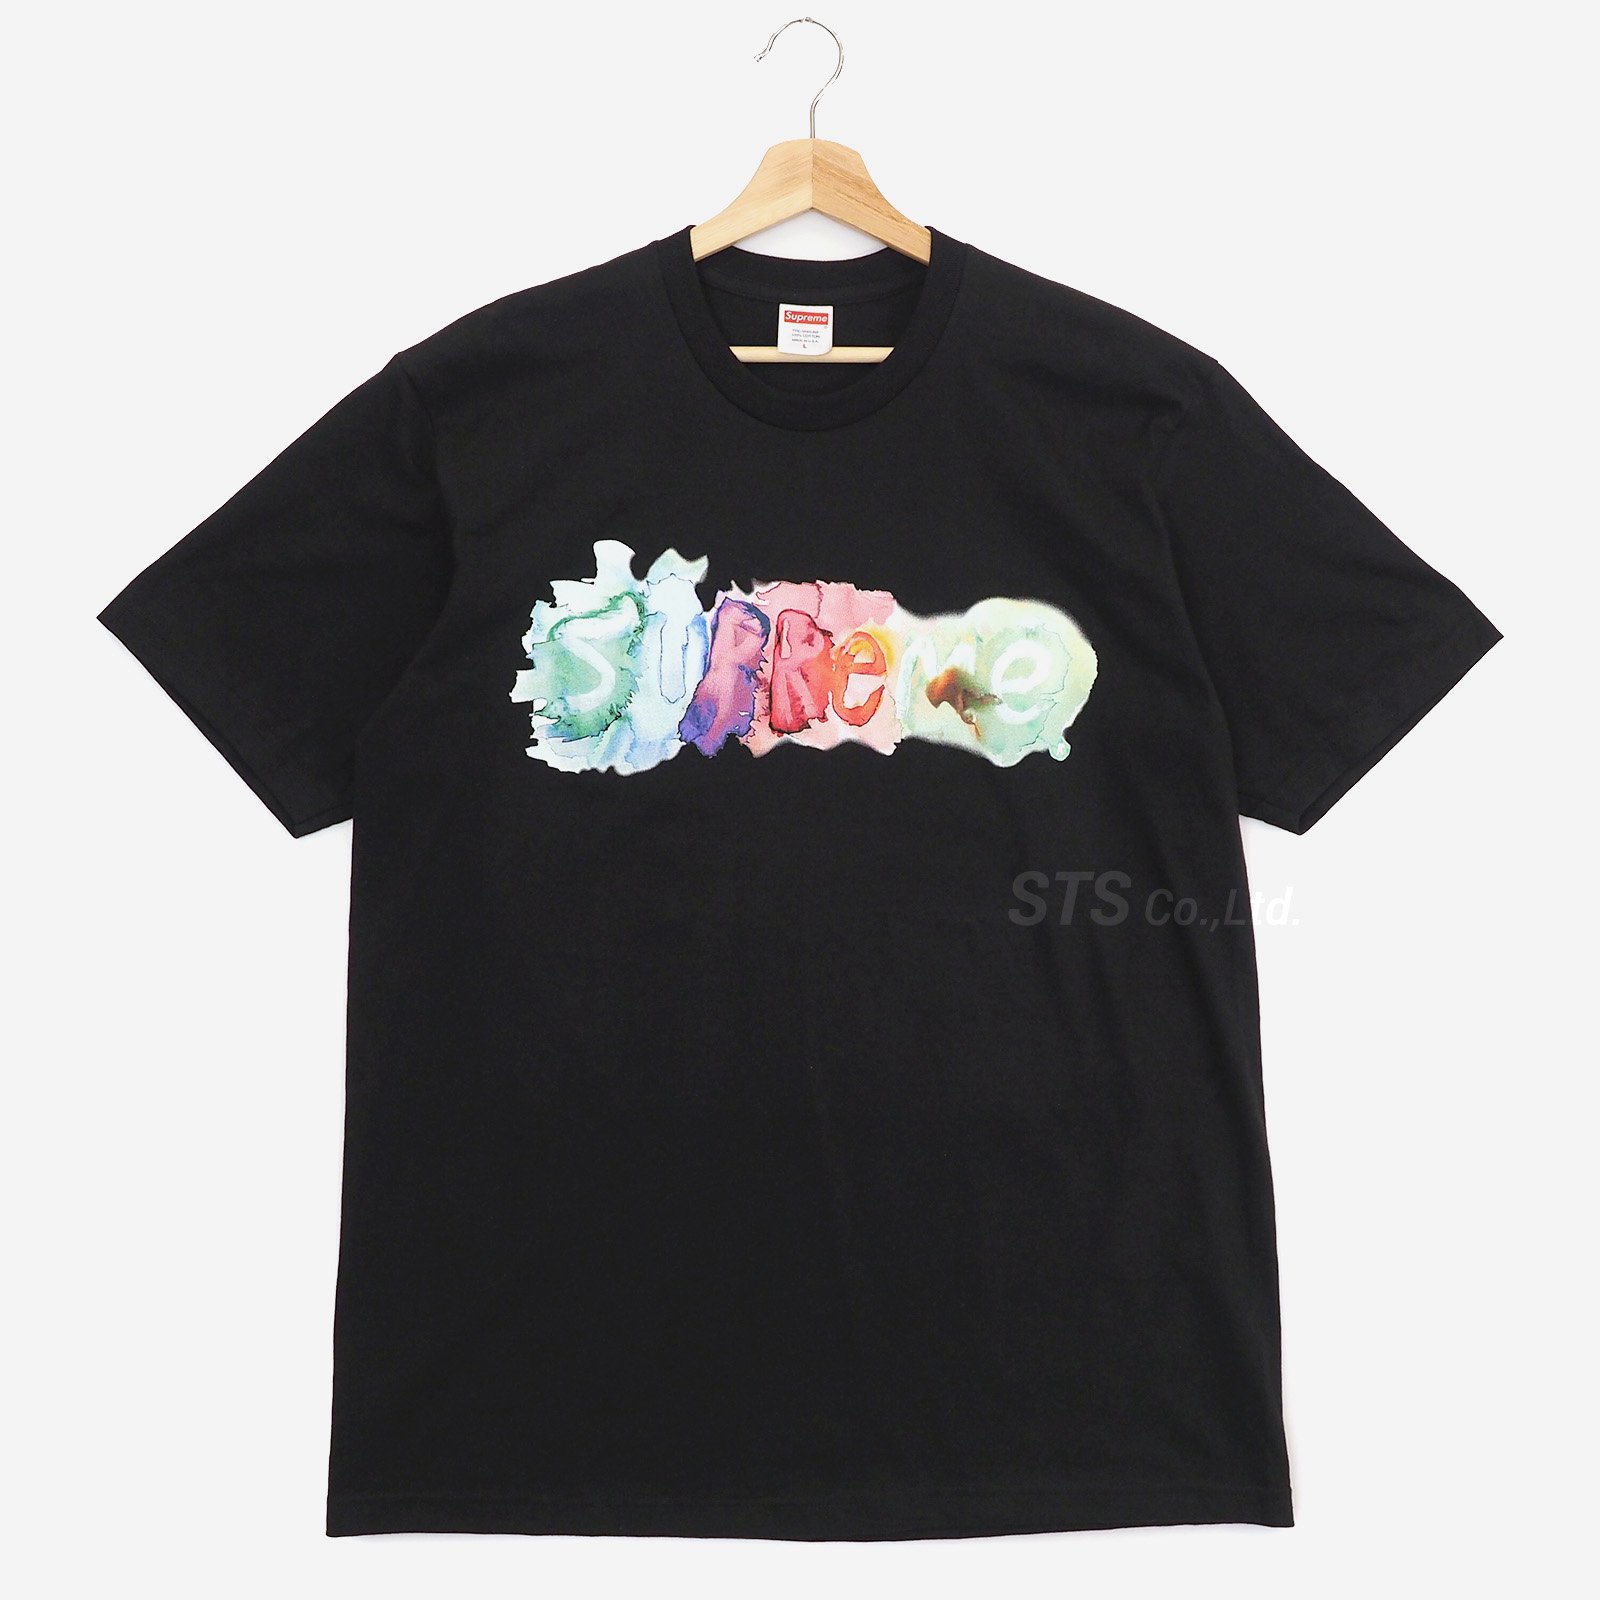 Supreme - Watercolor Tee - ParkSIDER